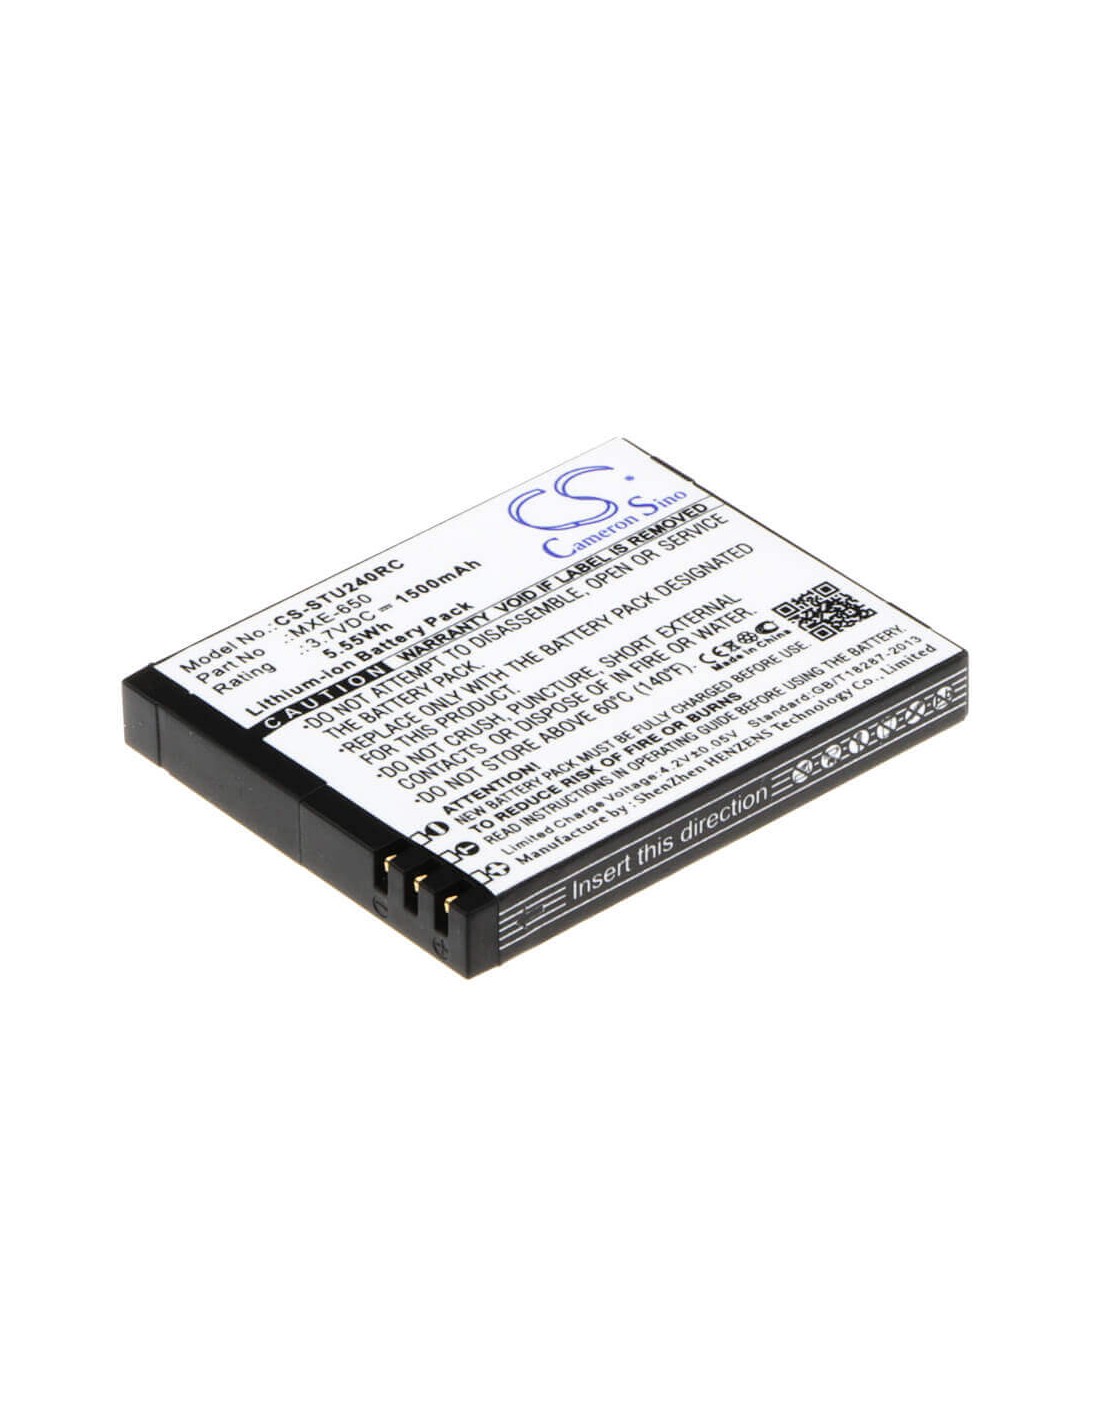 Battery for Tracfone Wireless U240c 3.7V, 1500mAh - 5.55Wh